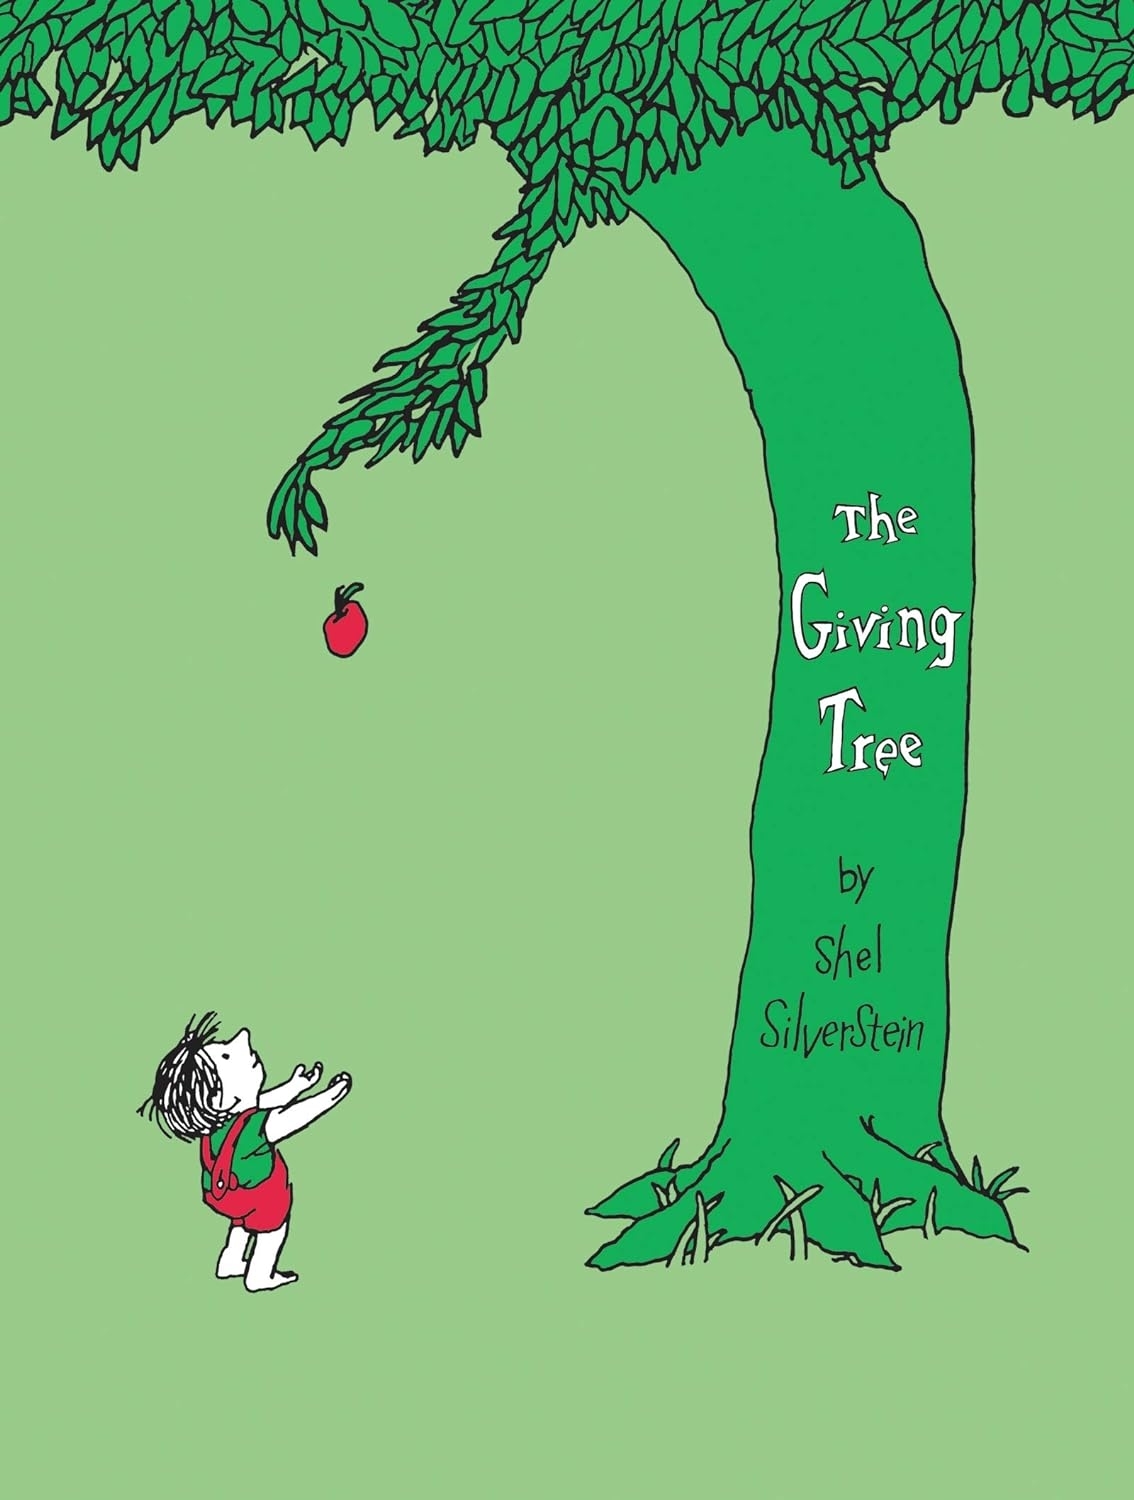 Cover of &quot;The Giving Tree&quot; by Shel Silverstein, showing a child reaching for an apple on a tree